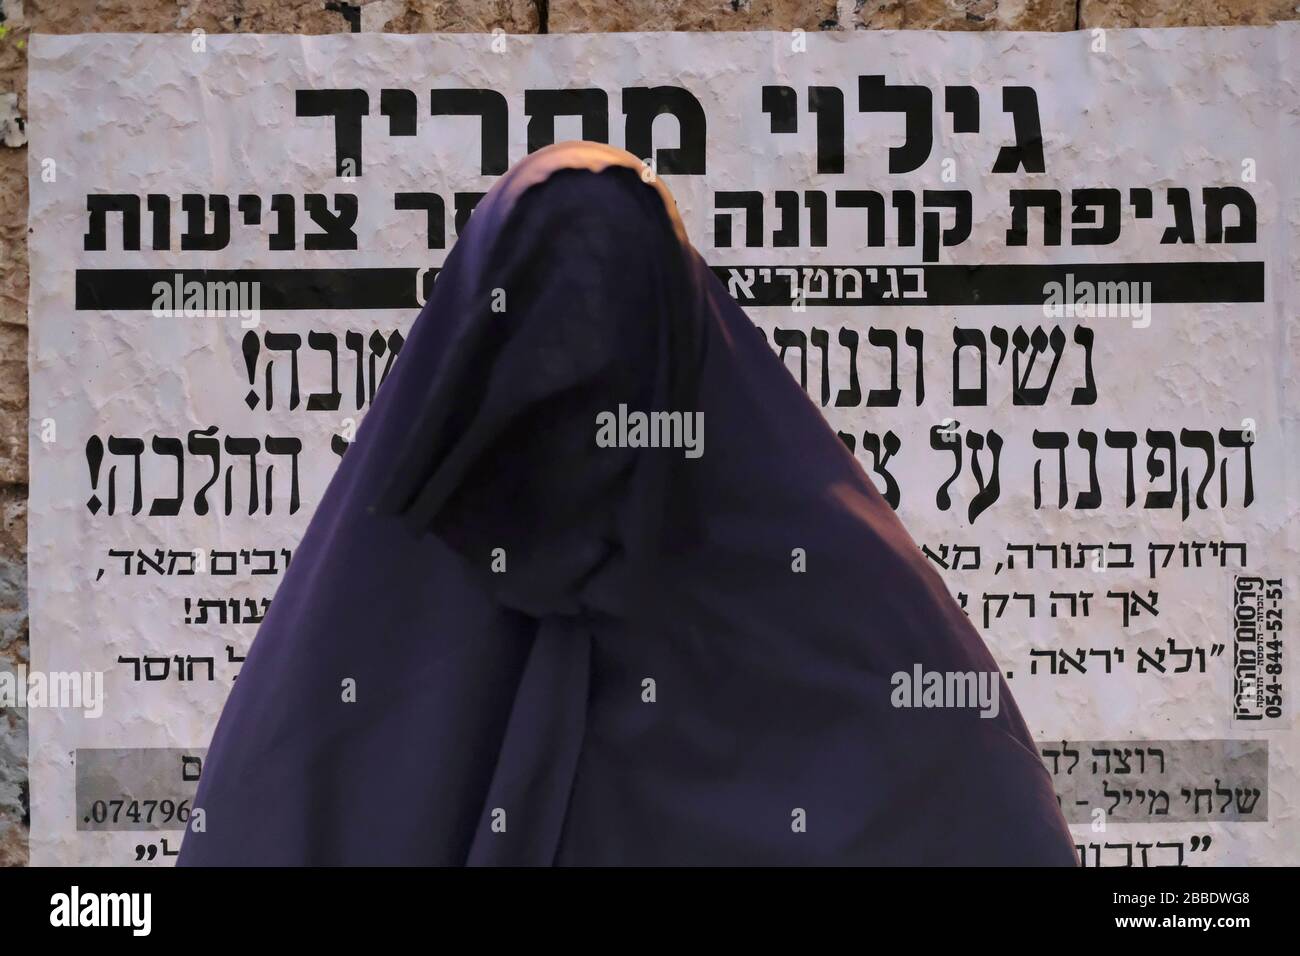 A woman of the so called Haredi Burqa Sect ( Jewish religious group, in which ultra-Orthodox Jewish women claim that modesty calls for a burqa-style covering of the entire body ) stands in front of a 'Pashkvil' announcement about the outbreak of the coronavirus disease (COVID-19) in Mea Shearim an ultra orthodox neighborhood in West Jerusalem, Israel. The Shalim, commonly known as the 'burqa cult,' is one of the most isolated and denigrated sects in Israel, even among the country's ultra-Orthodox population. Stock Photo